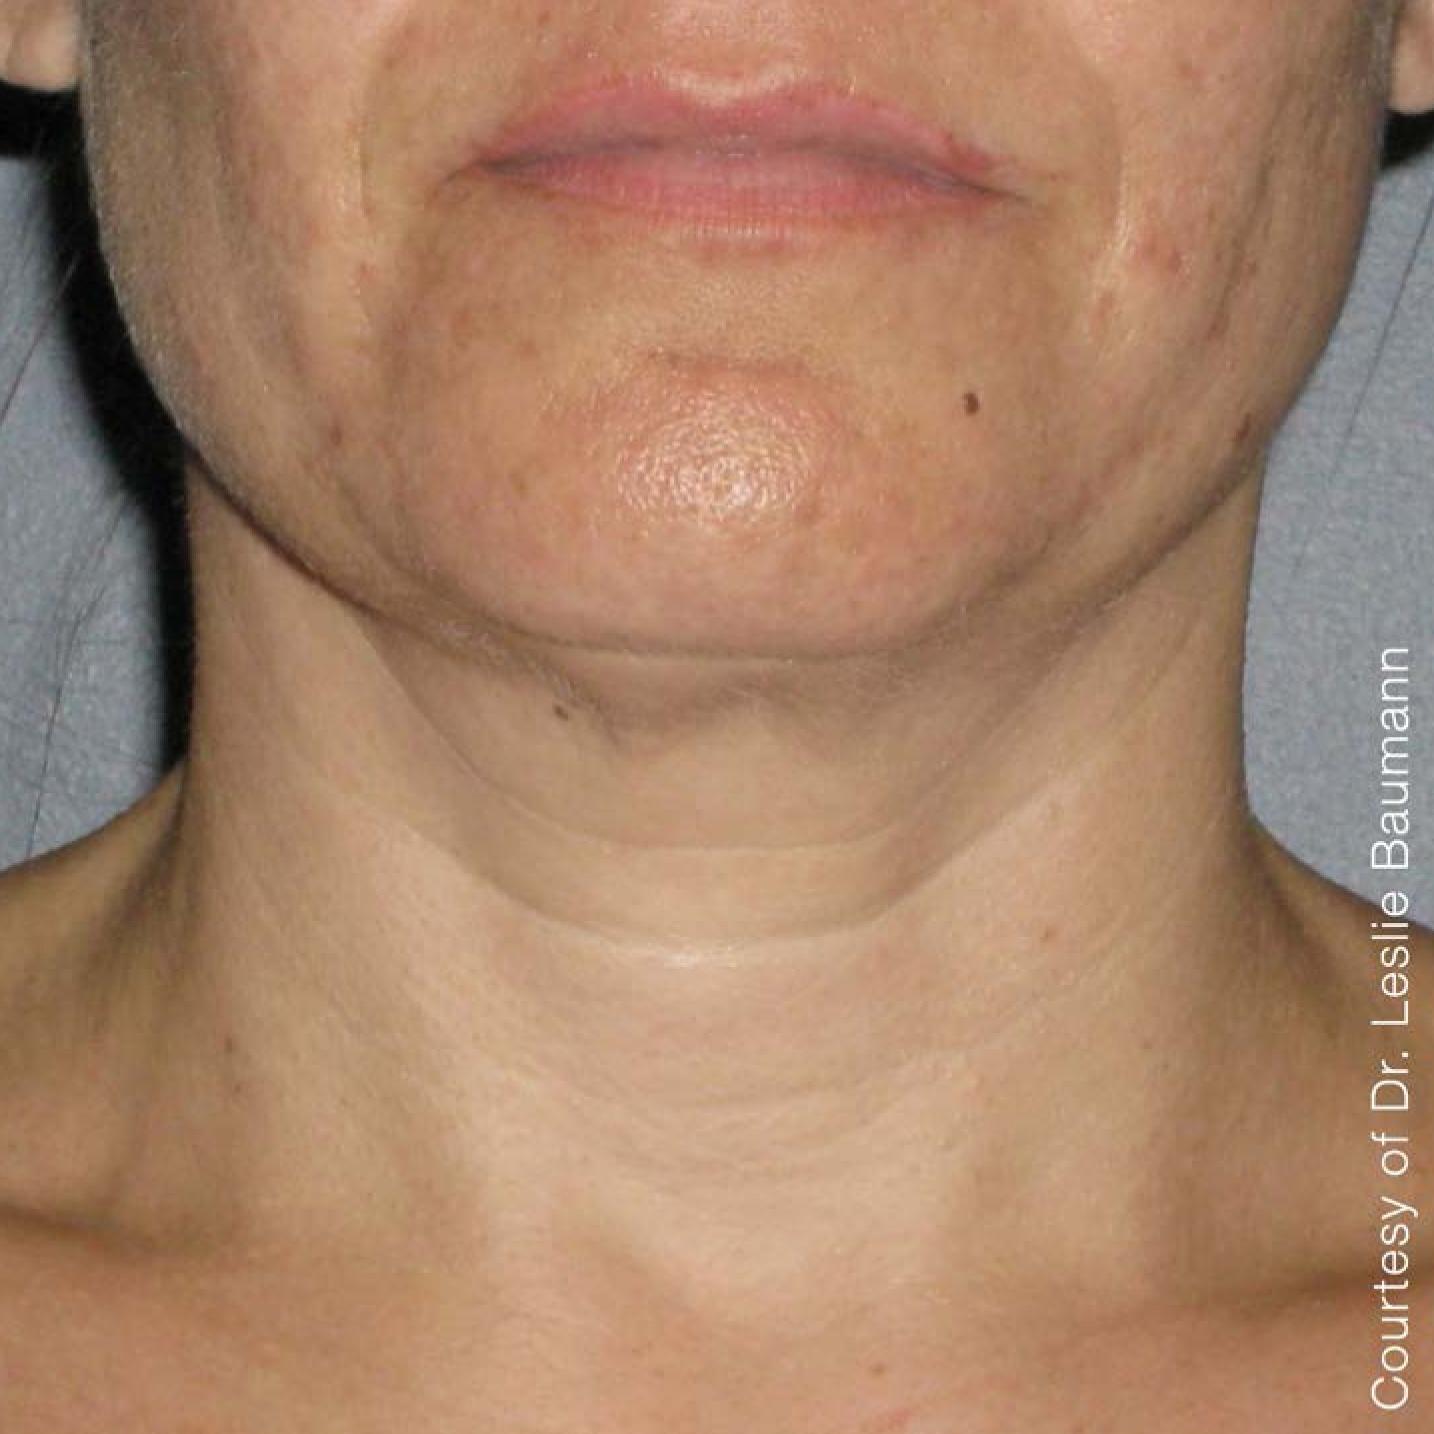 Ultherapy® - Neck: Patient 3 - After 1